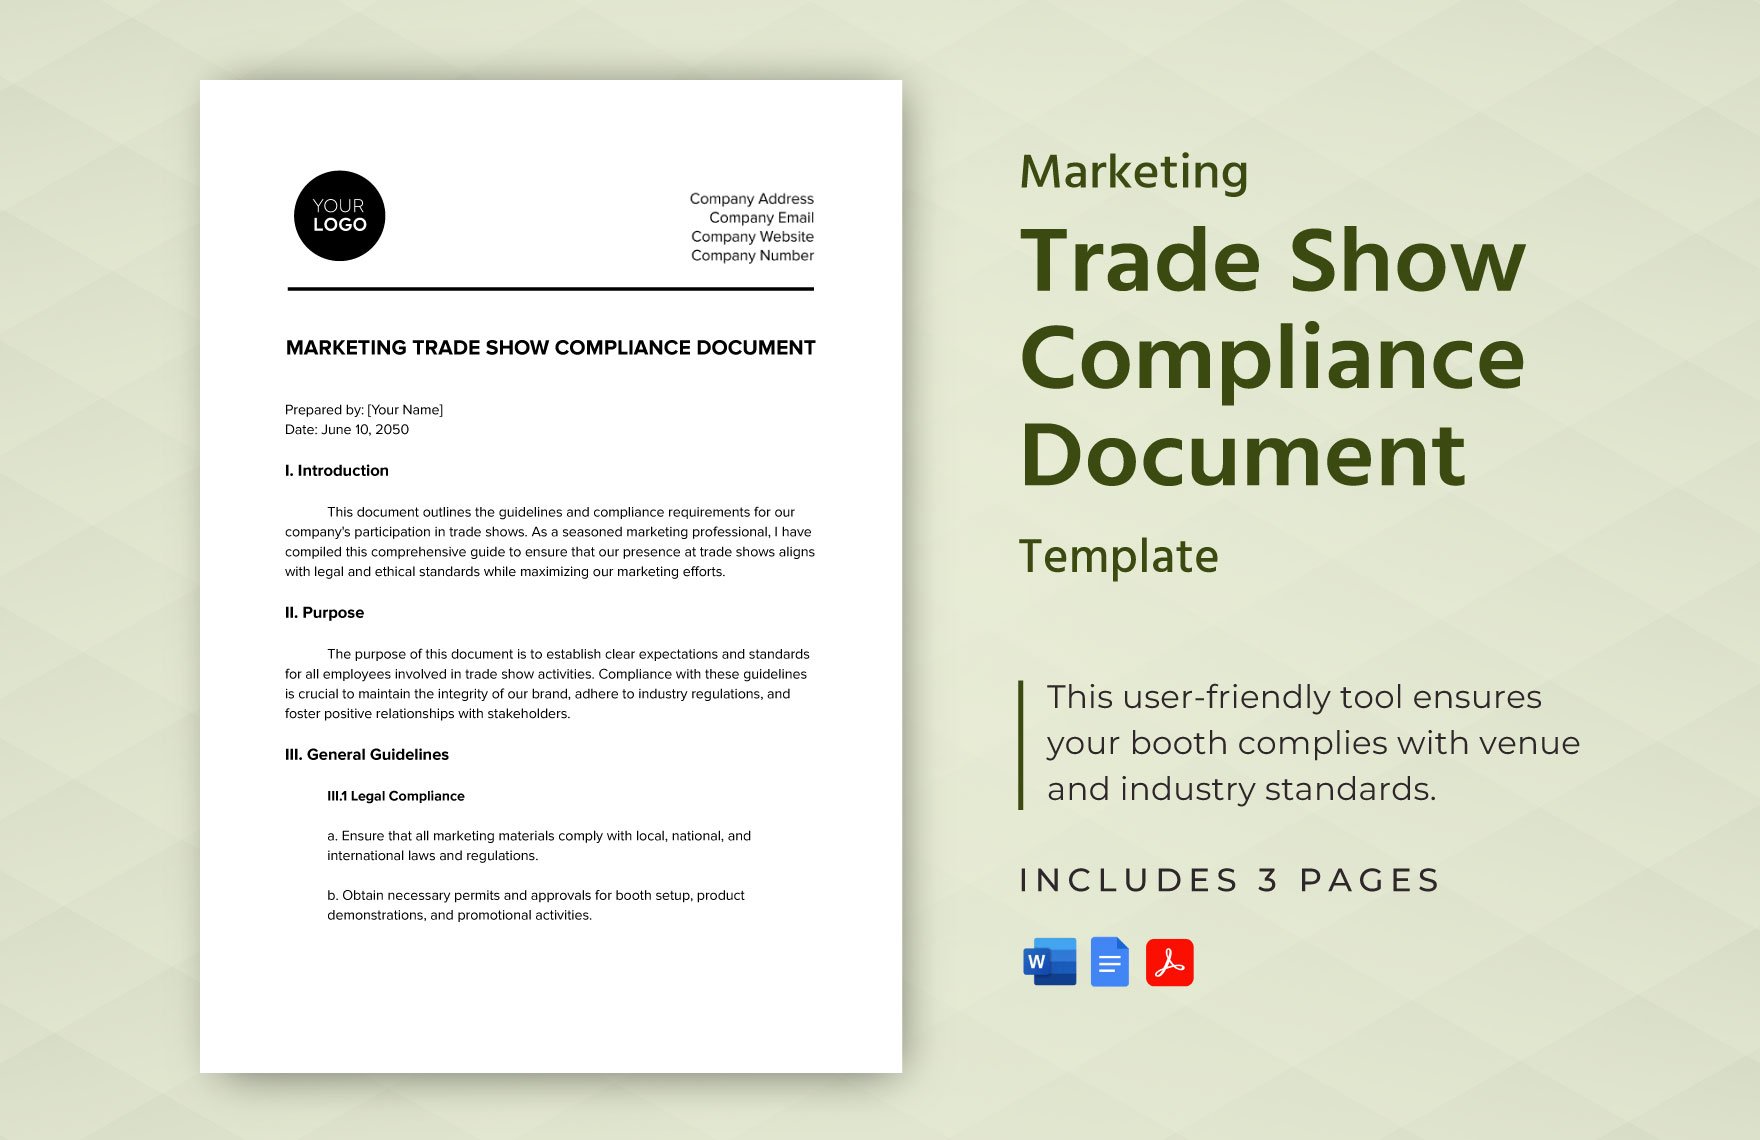 Marketing Trade Show Compliance Document Template in Word, Google Docs, PDF